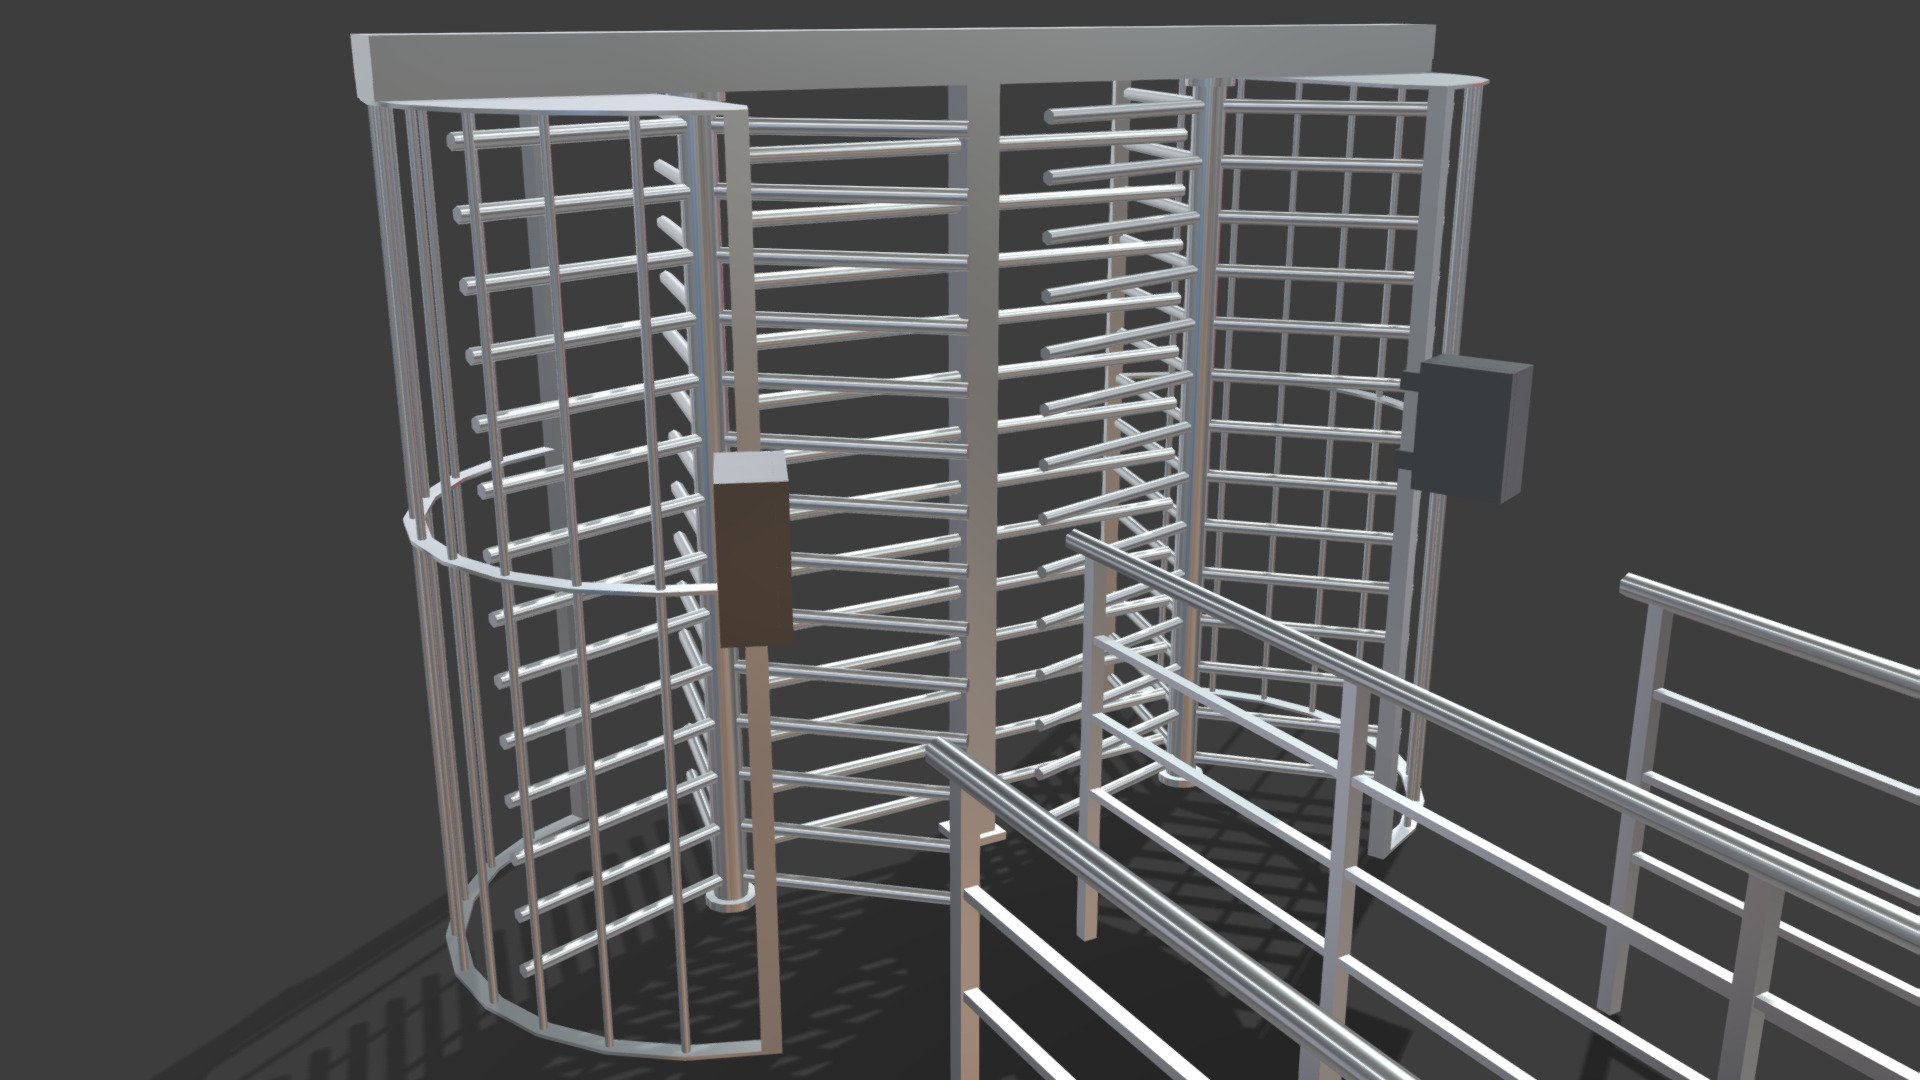 Another asset I’ve made to complement a bigger model, this is a turnstile I made for one of my stadium models. However, here it’s rectified and with optimized polygon count.

No textures, materials only 3d model